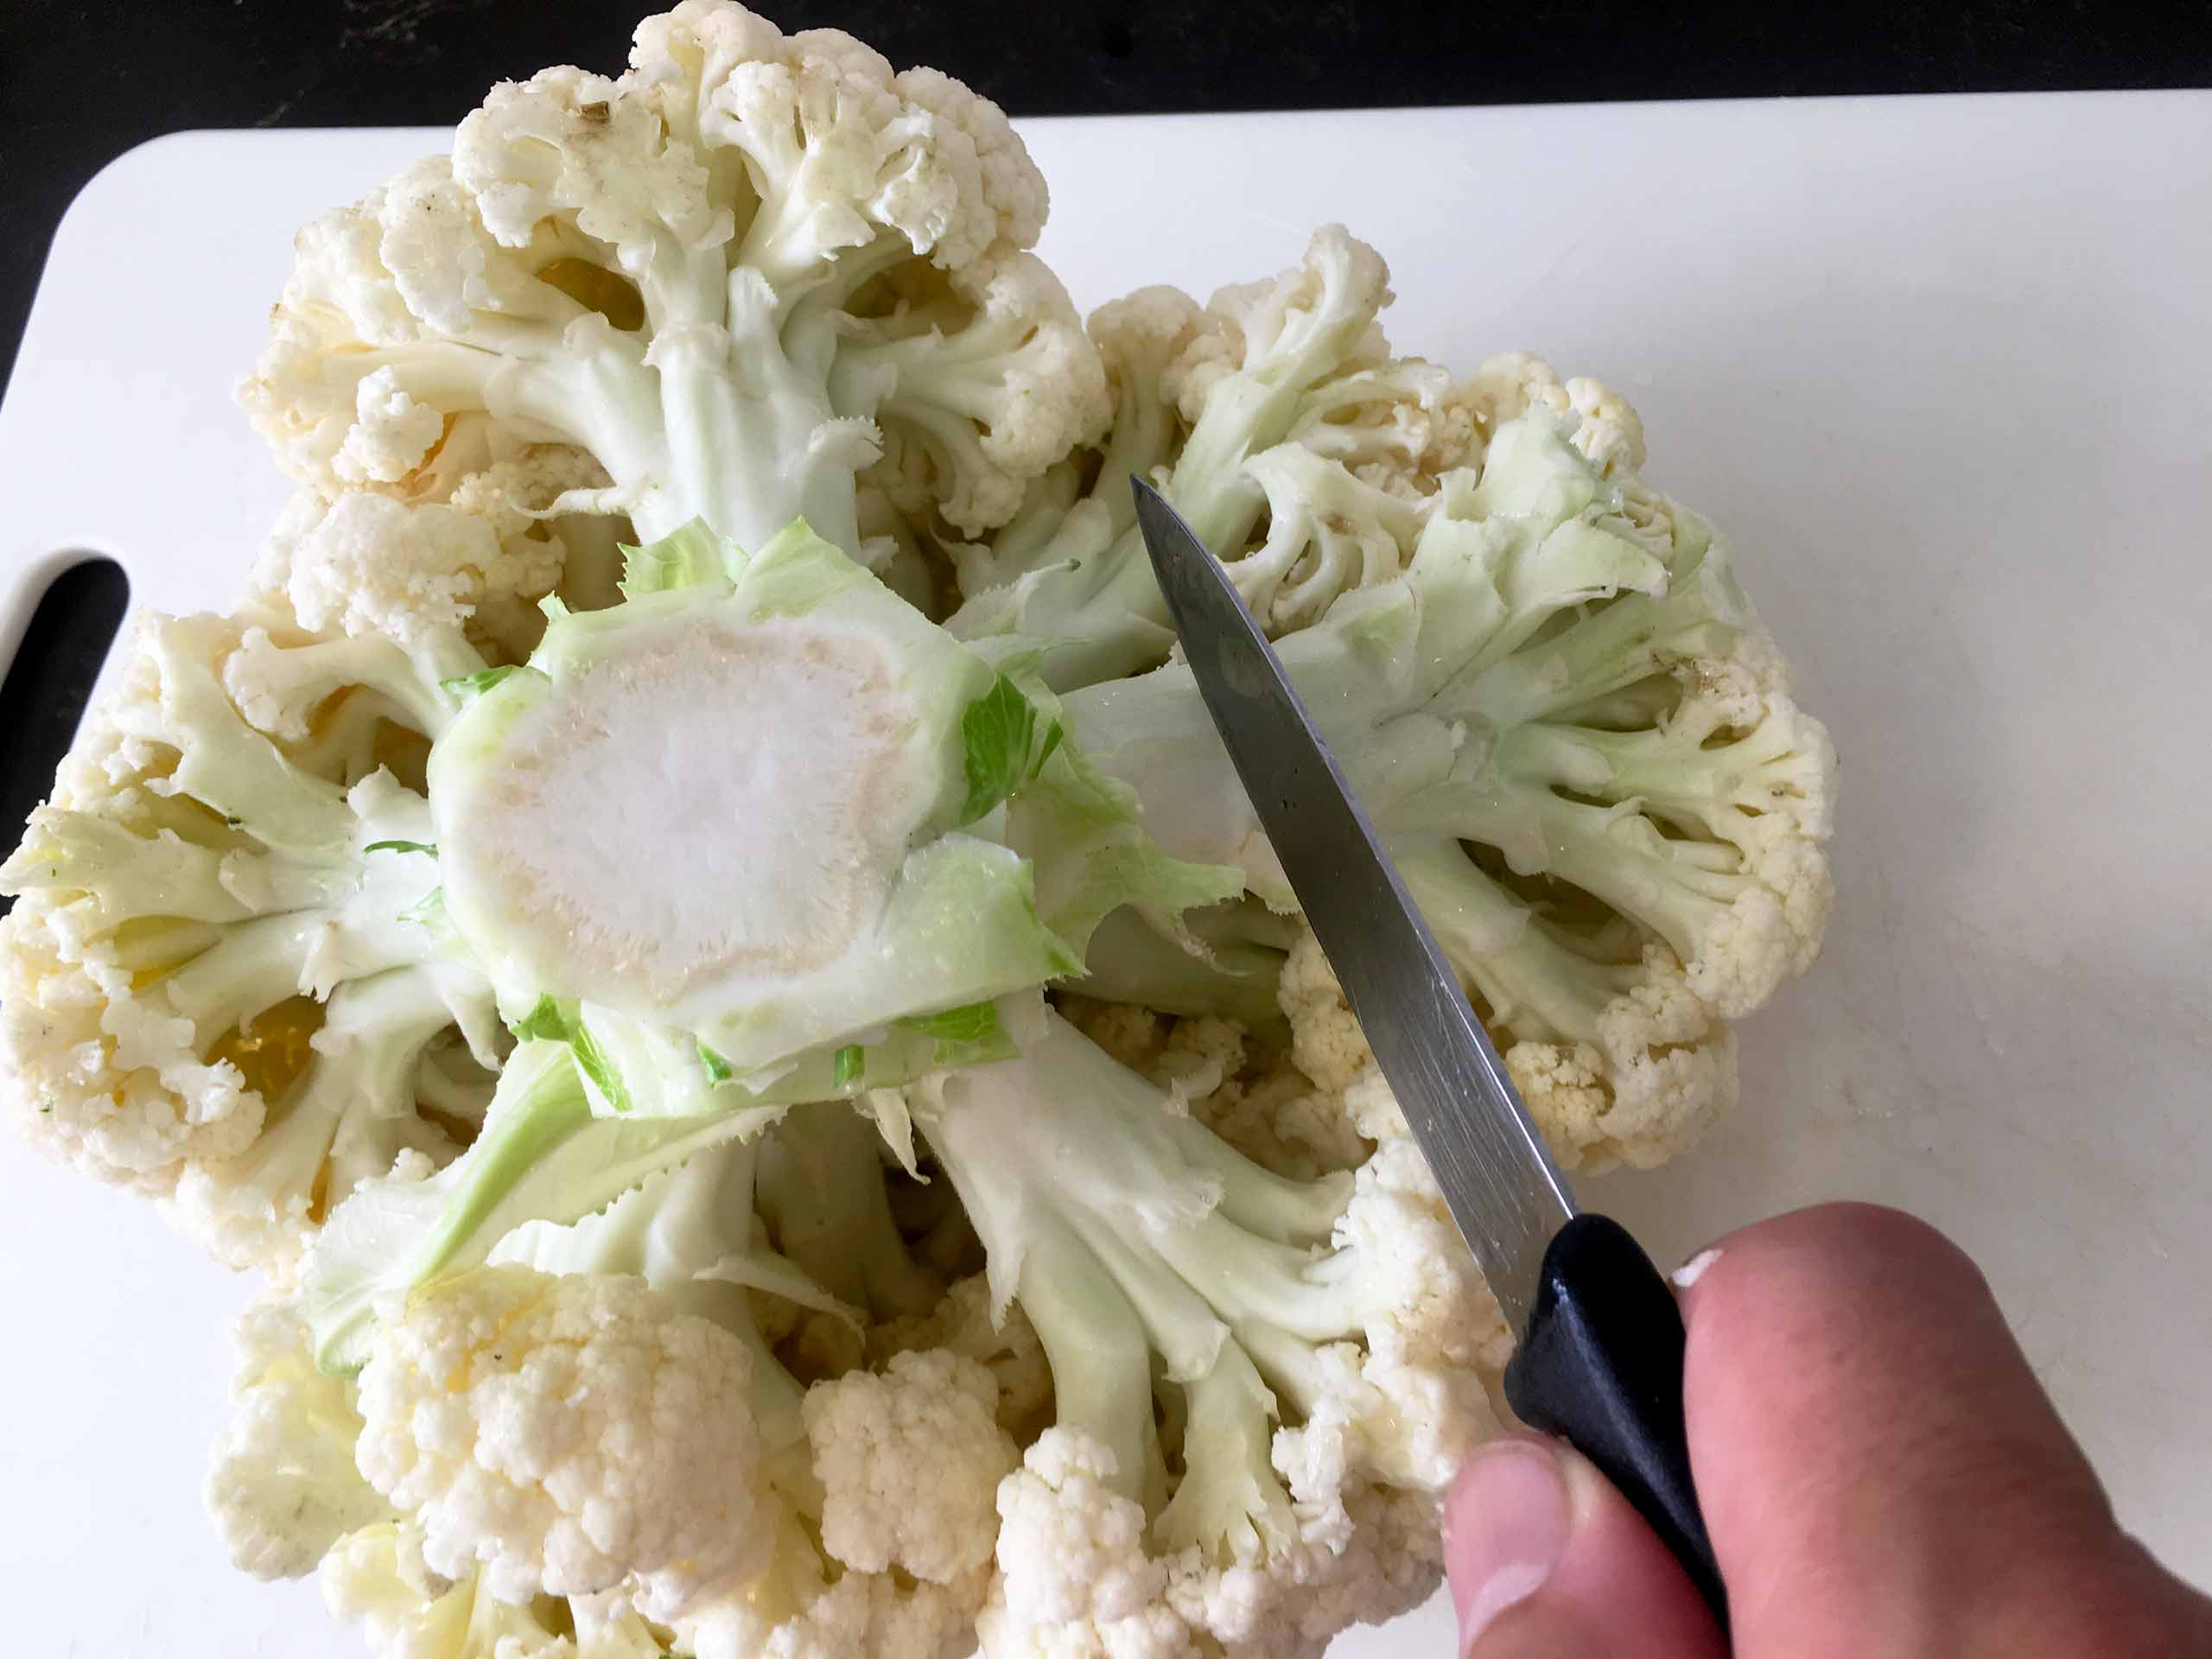 cutting the Cauliflower with a knife